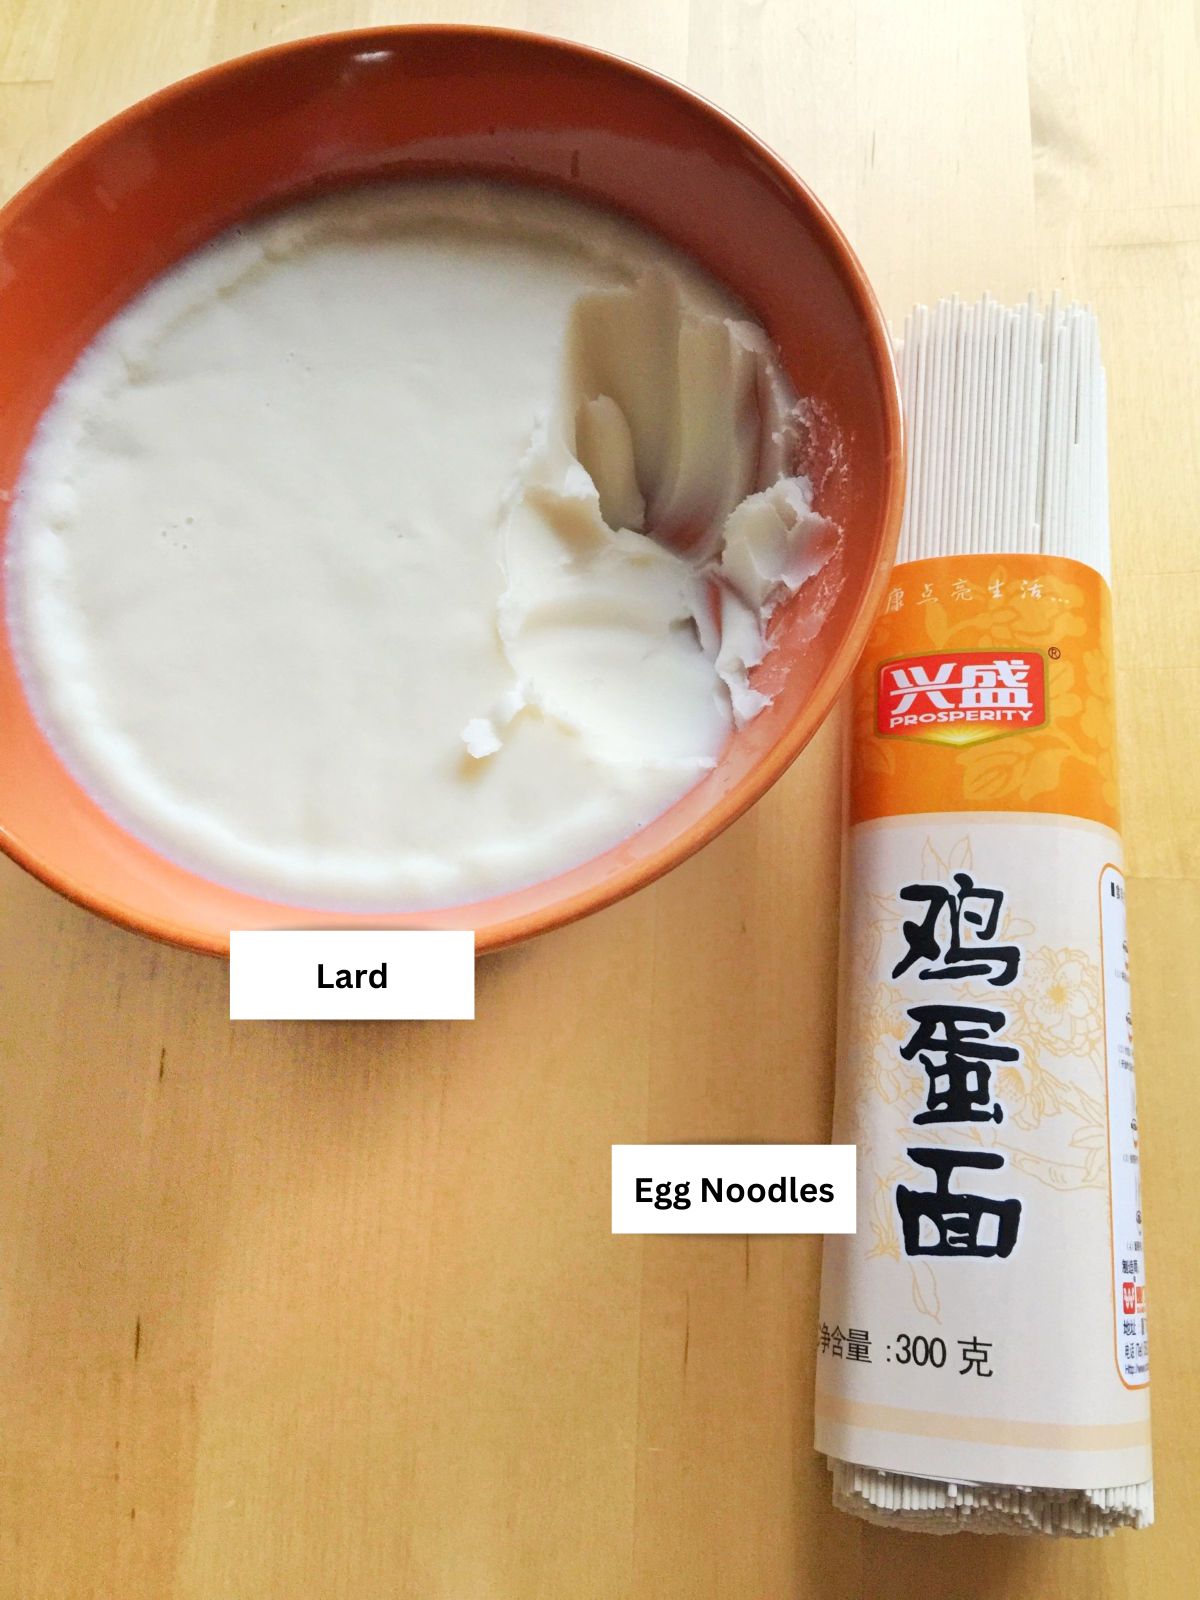 Close up view of a bowl of lard and a bundle of thin egg noodles - labeled ingredients.